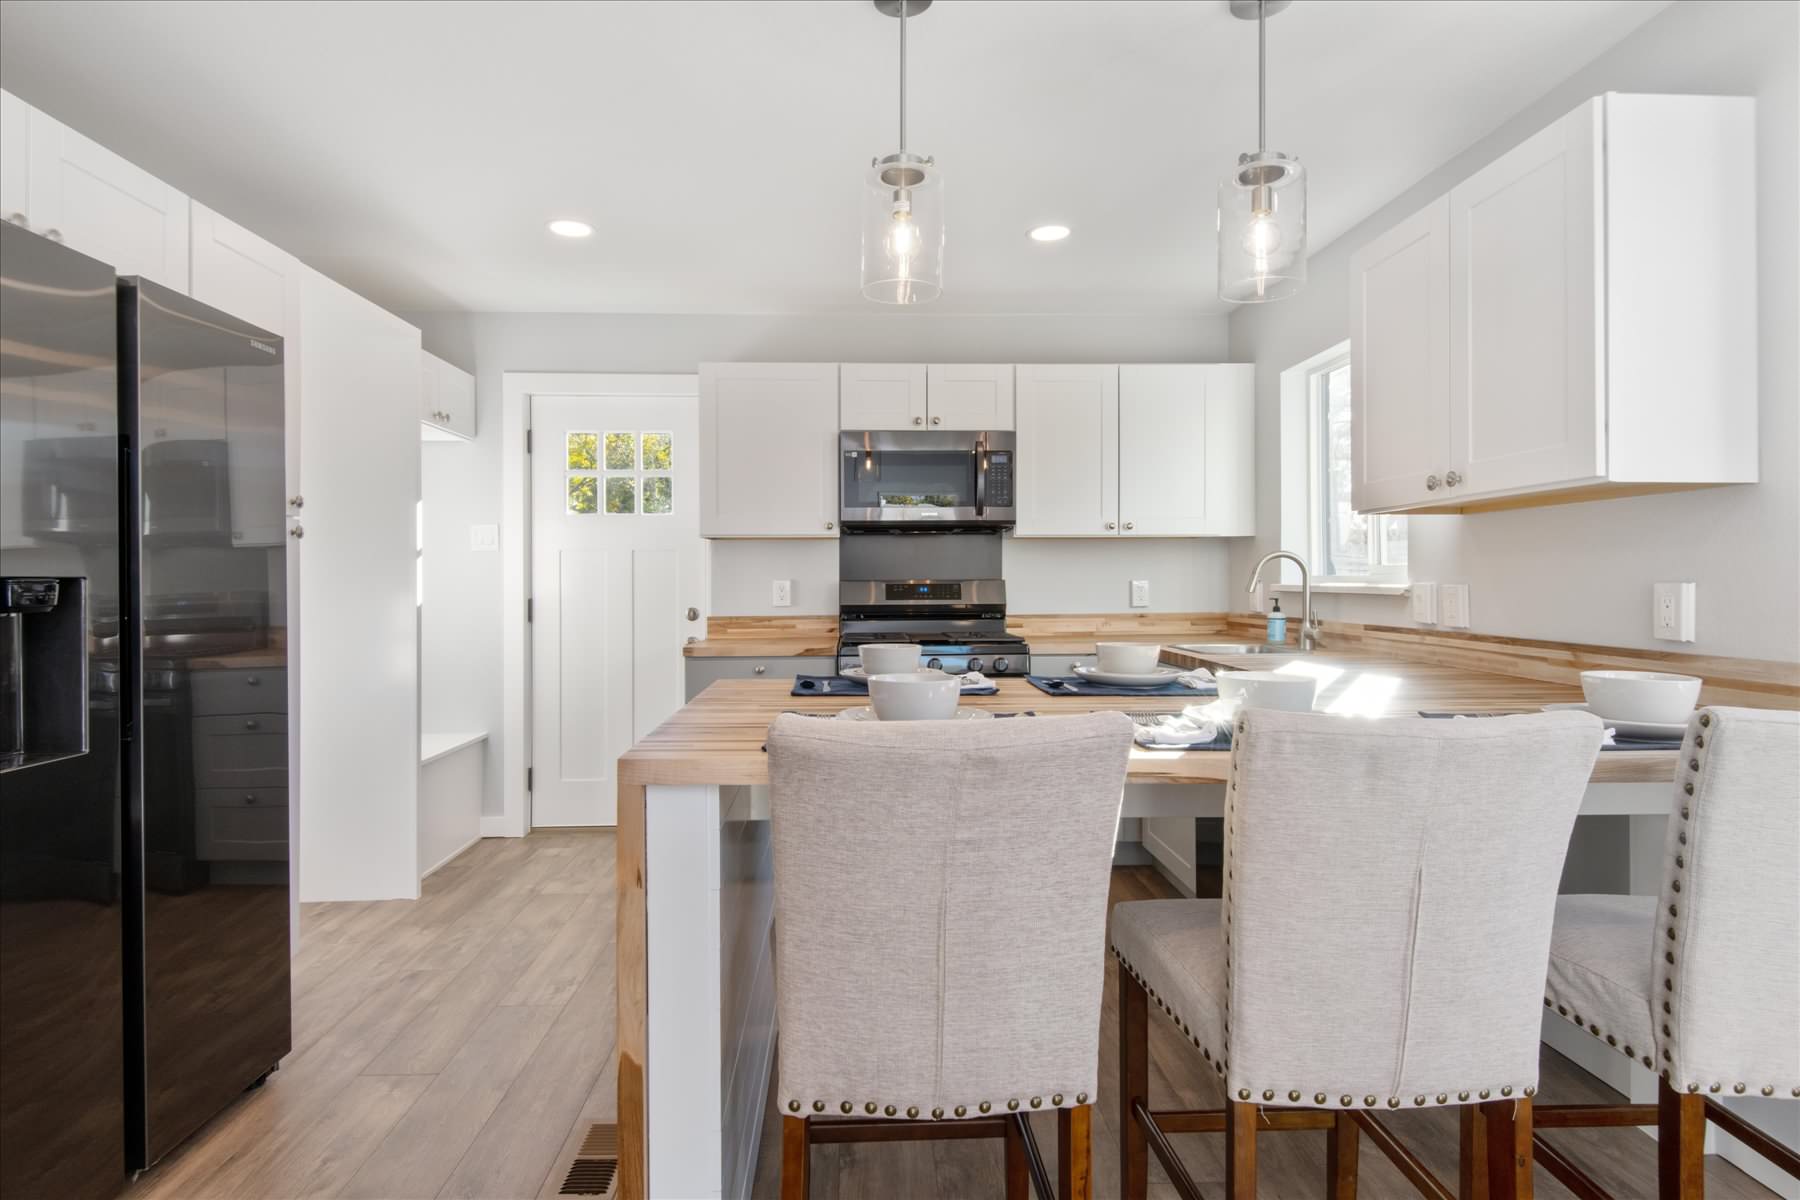 The centerpiece to the kitchen is the beautiful butcher block countertop and waterfall style breakfast bar